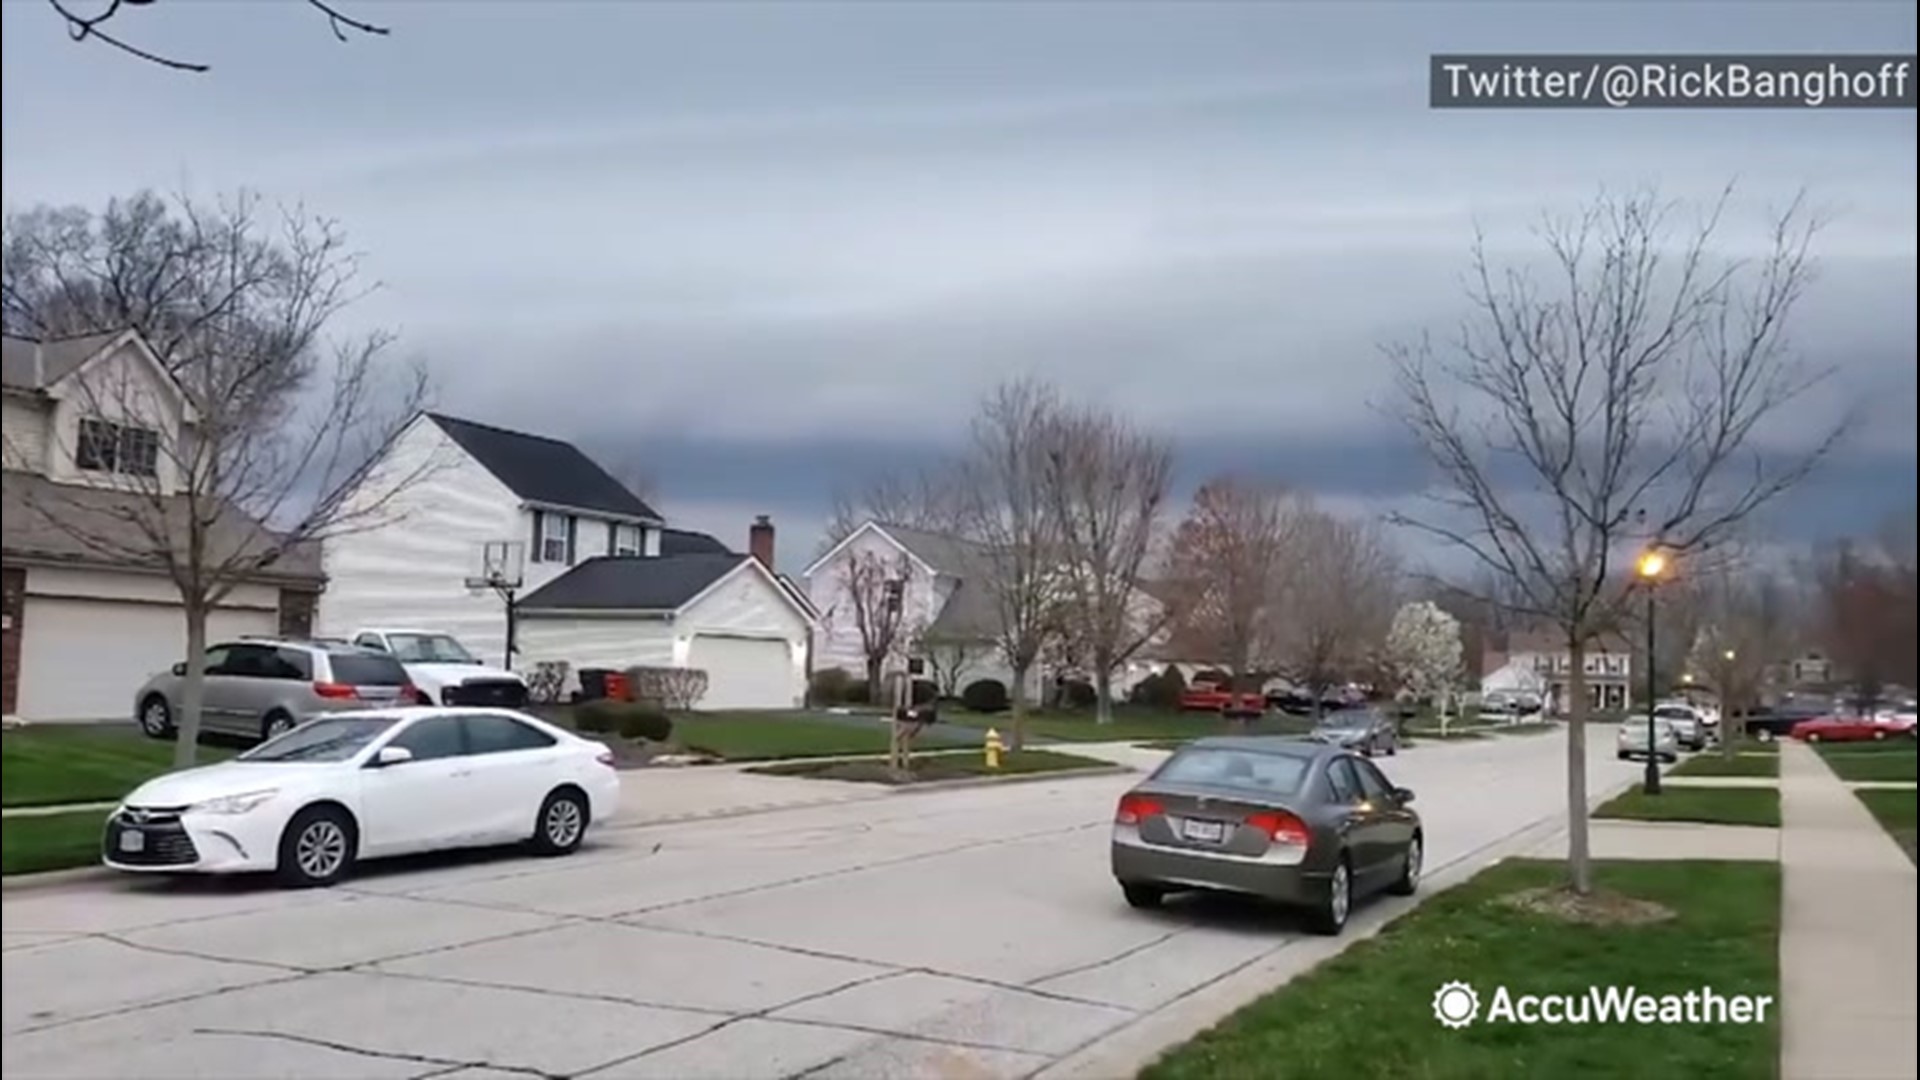 On April 7, a shelf cloud moved in over a neighborhood in Grove City, Ohio.